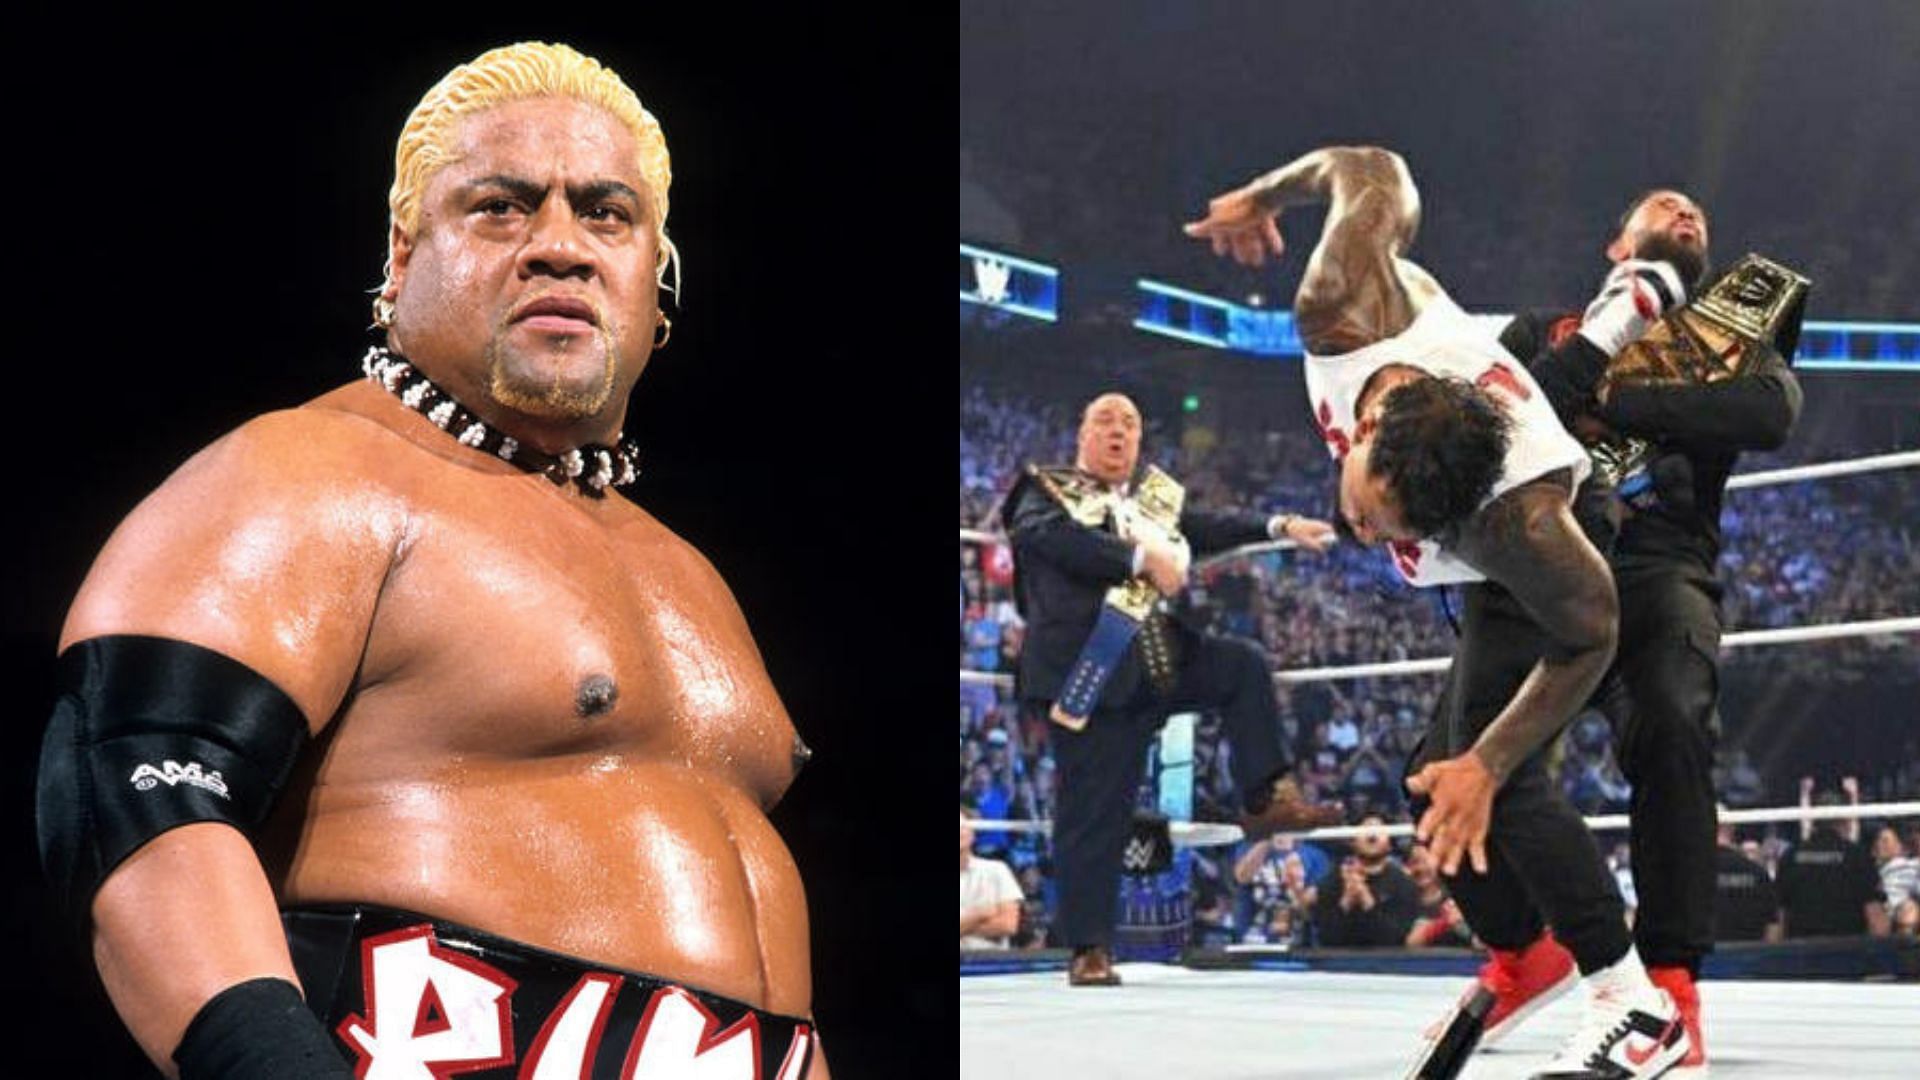 Rikishi has reacted to his son Jey Uso betraying Roman Reigns